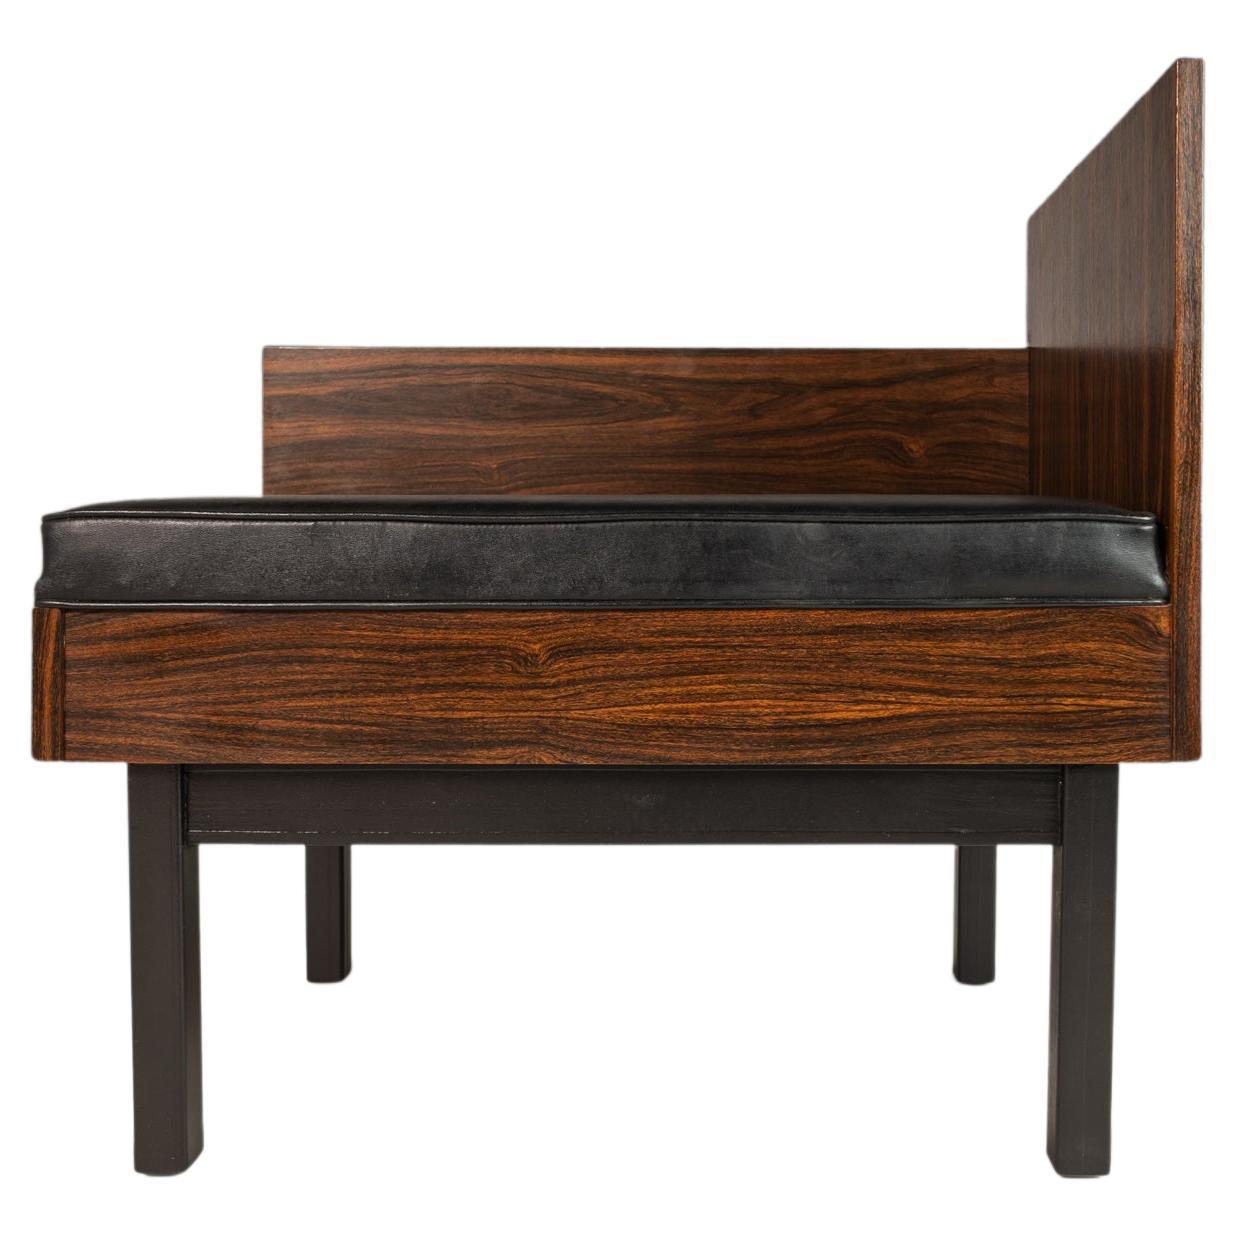 Set of Two ( 2 ) Modular Benches Kissing Benches in Rosewood Laminate, c. 1950's For Sale